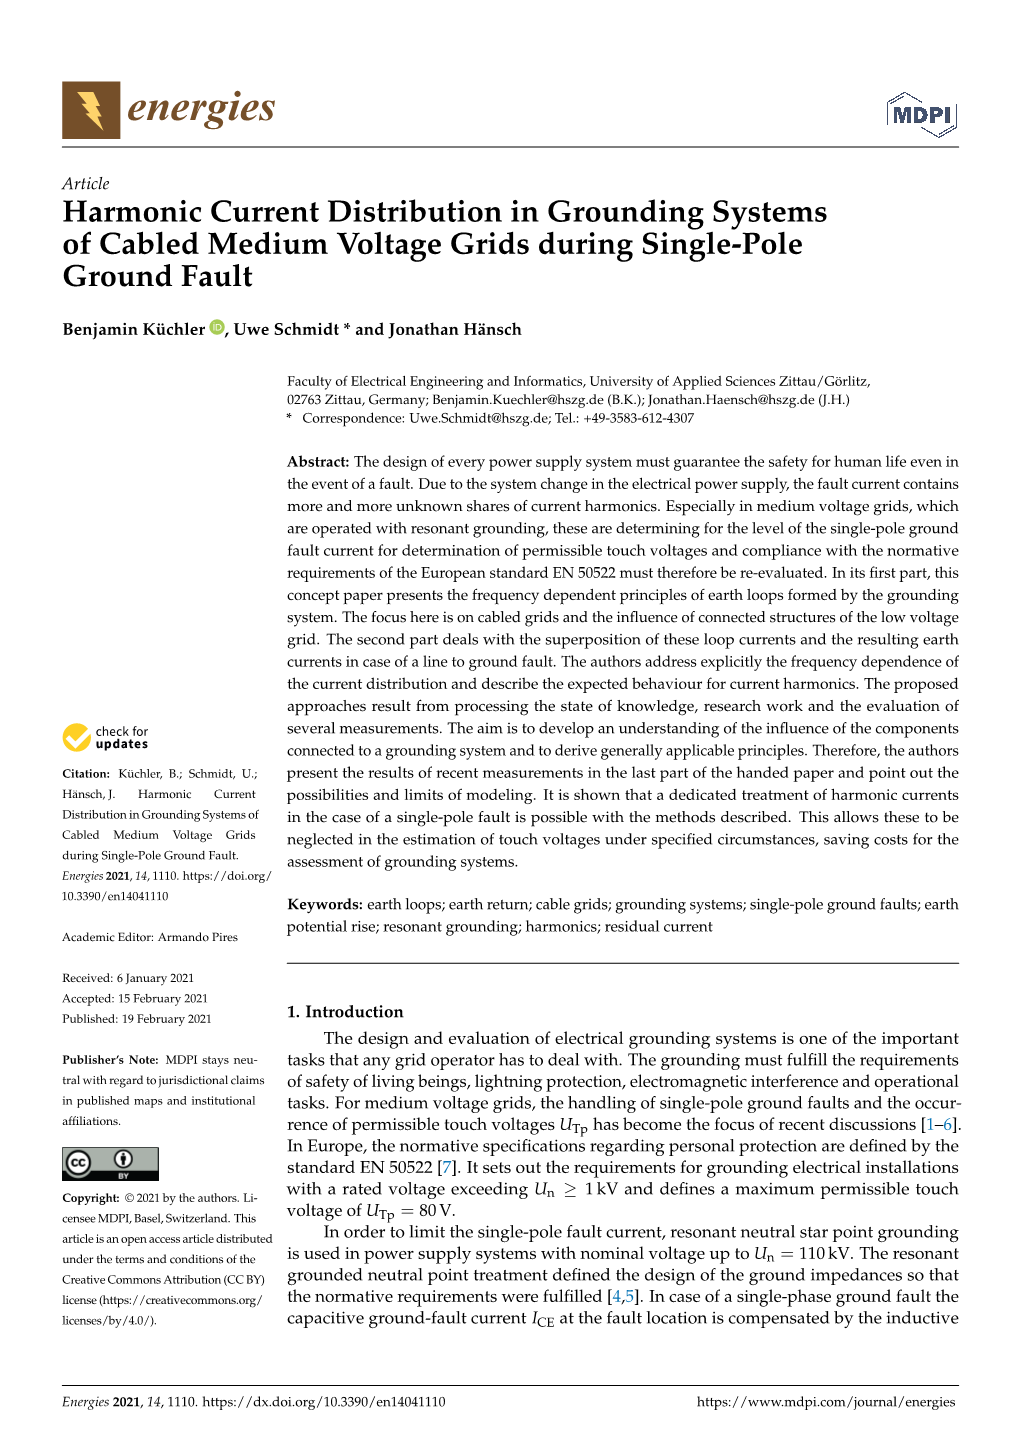 Harmonic Current Distribution in Grounding Systems of Cabled Medium Voltage Grids During Single-Pole Ground Fault